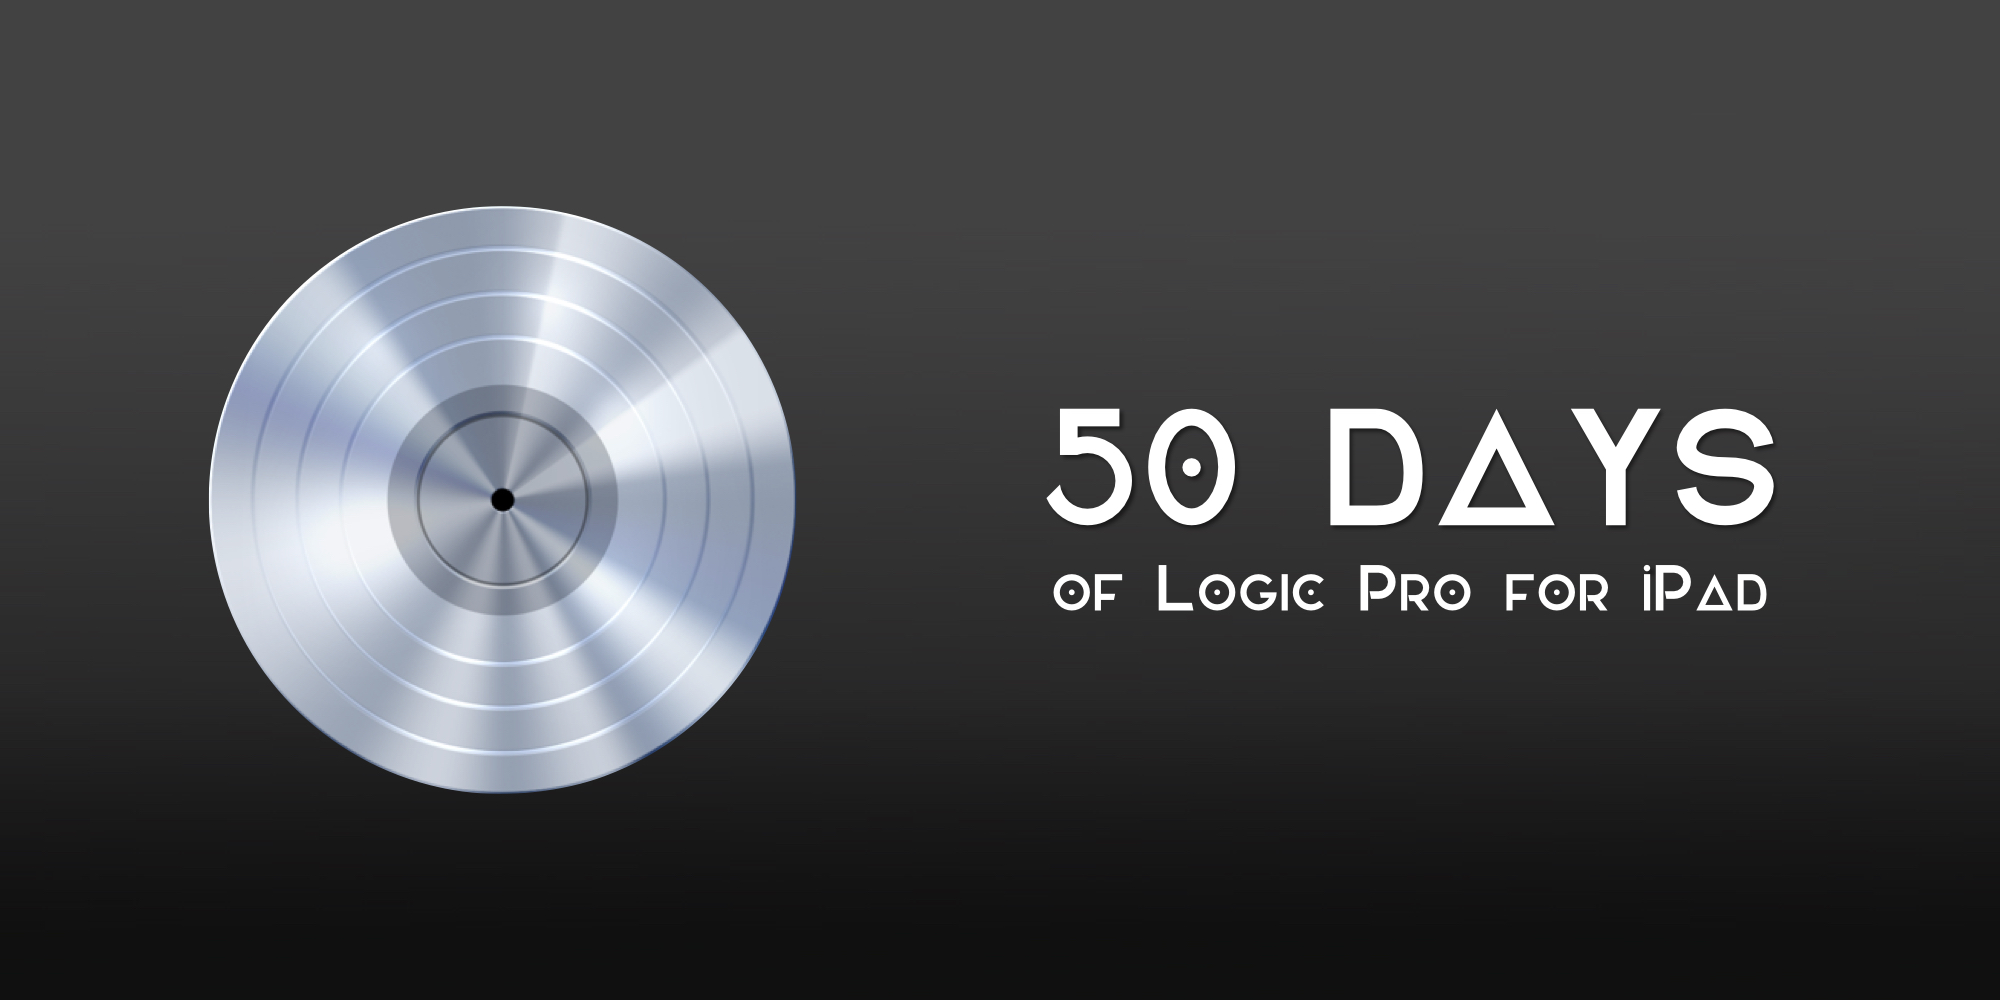 Graphic with CD on the left (from the Logic Pro logo) with text on the right saying “50 Days of Logic Pro for iPad”.